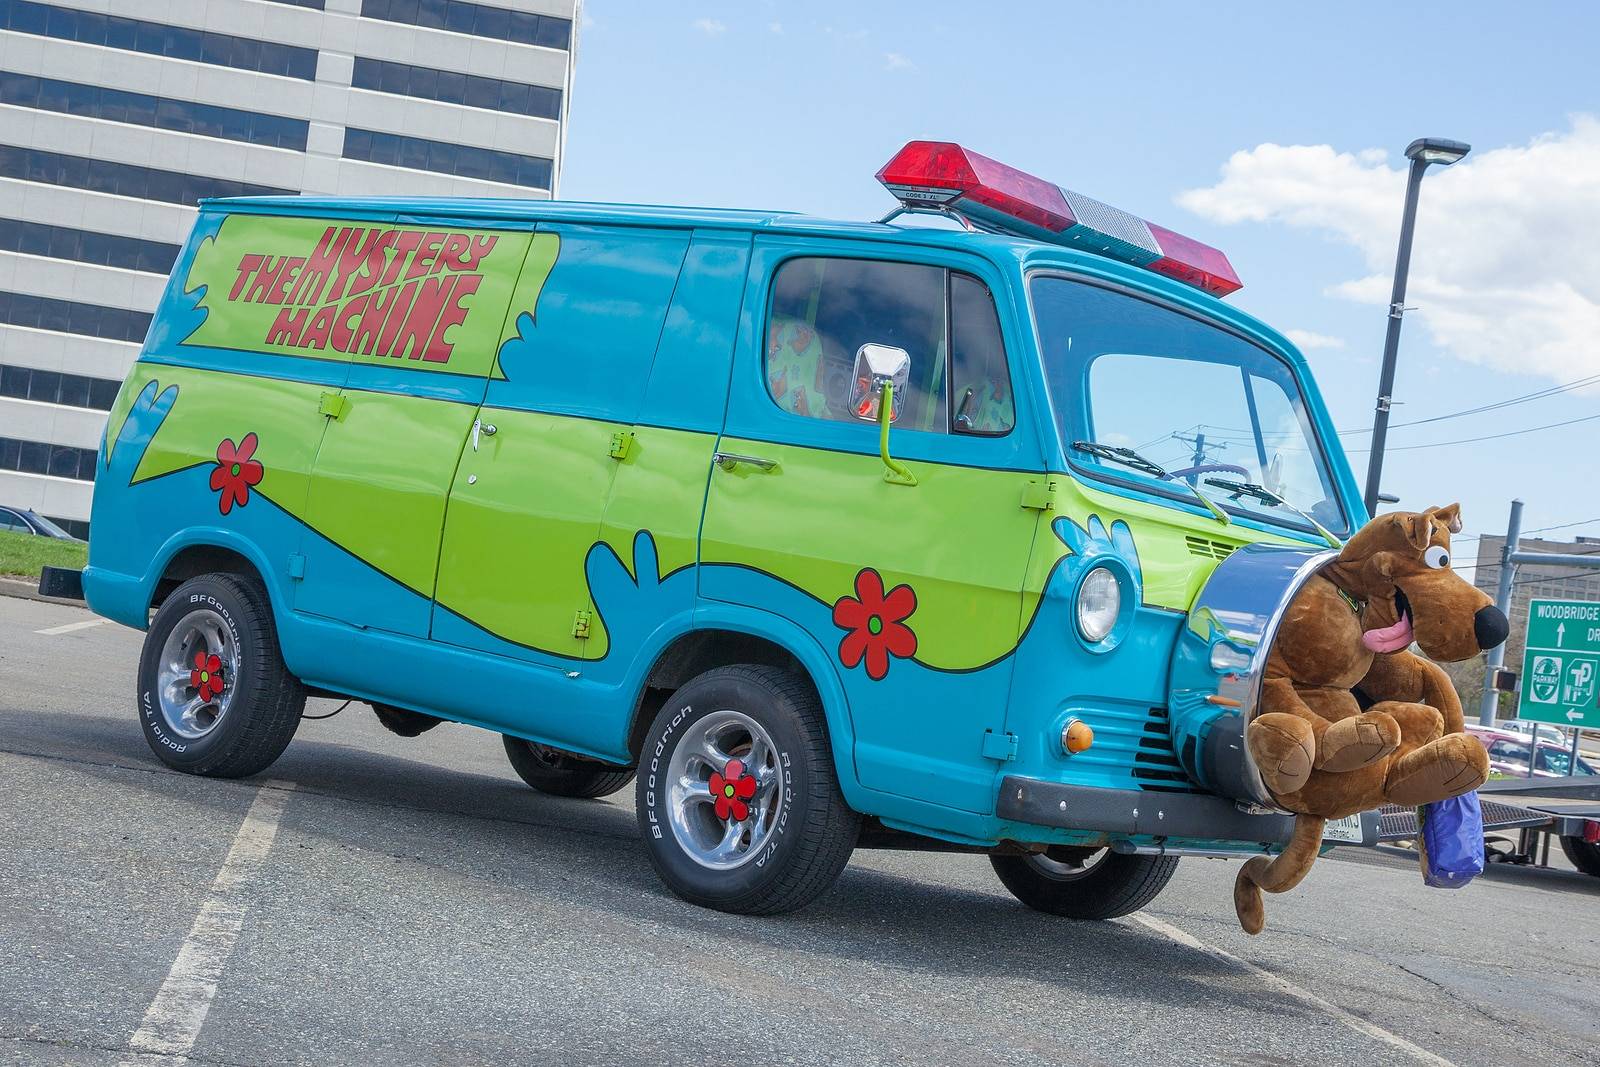 controversy in the new Scooby-Doo movie